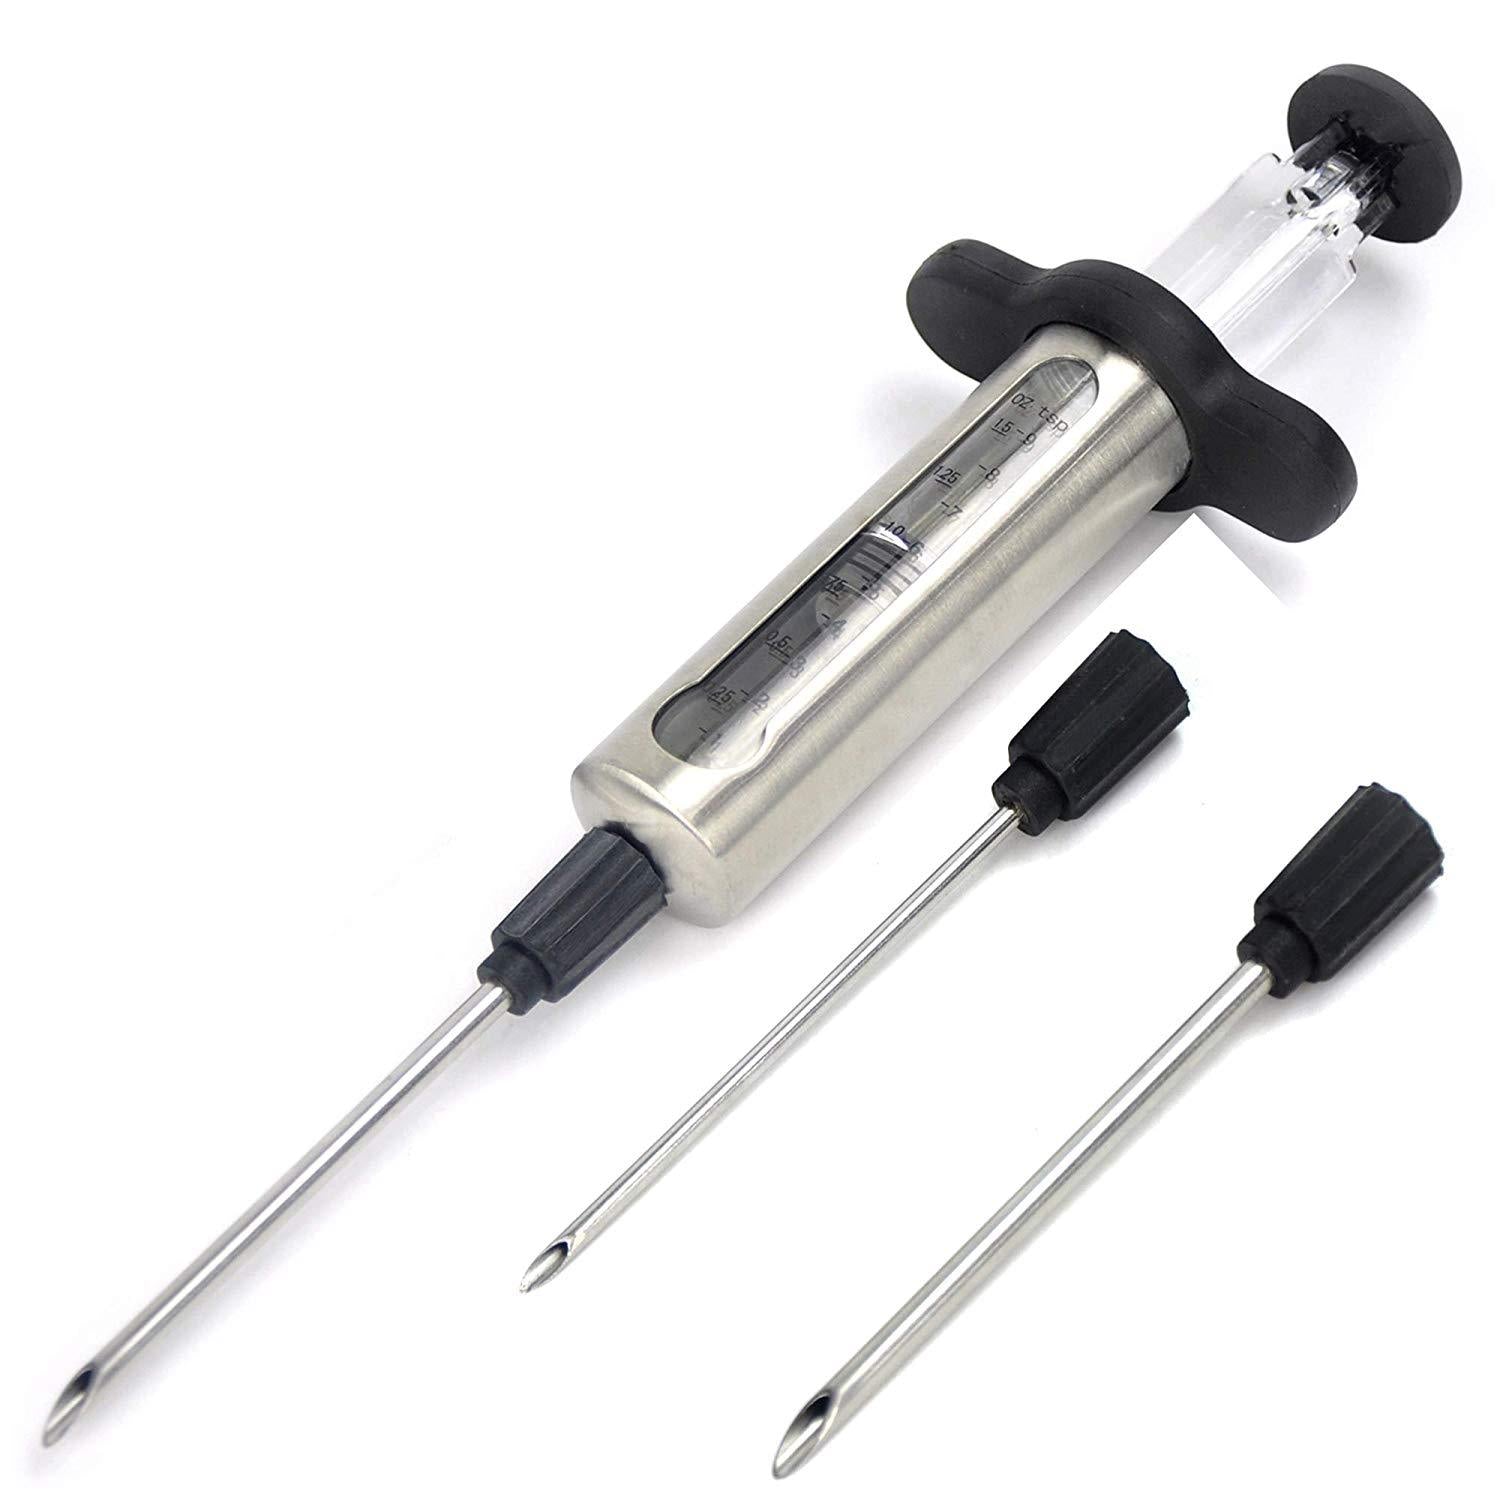 Yukon Glory YG-200 Professional Marinade Injector Kit for Meat and Poultry Seasoning Great for BBQ and Home Cooking, Durable Stainless Steel